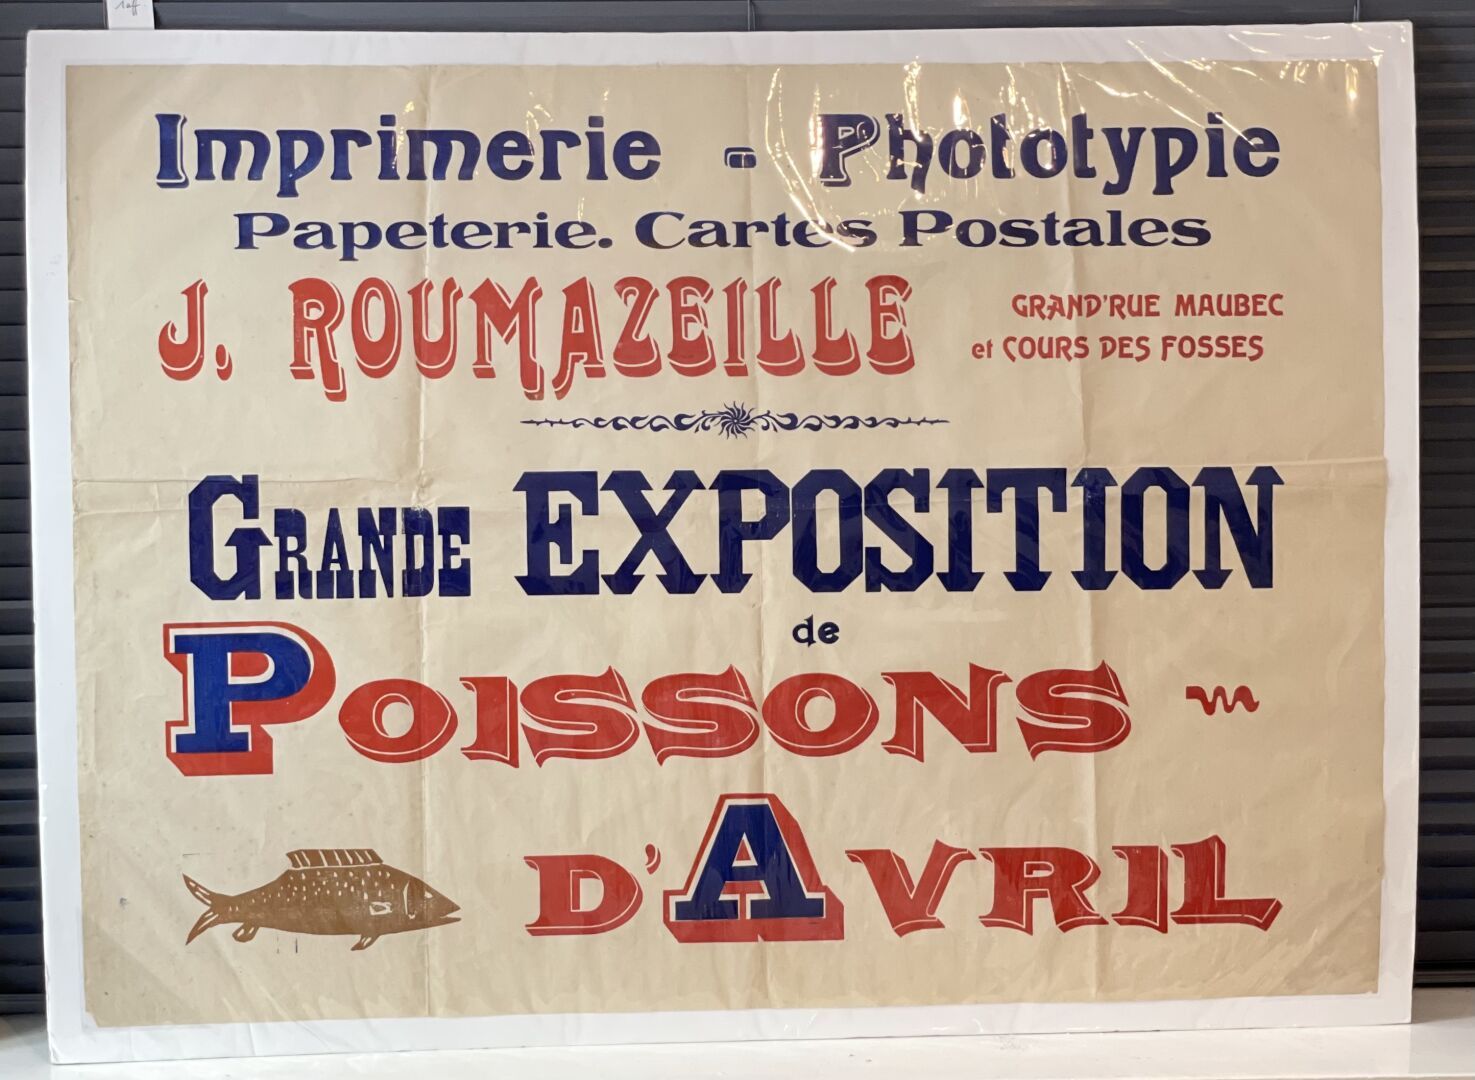 ROUMAZEILLE. Grande exposition de poissons d'avril. Printing - Phototyping - Sta&hellip;